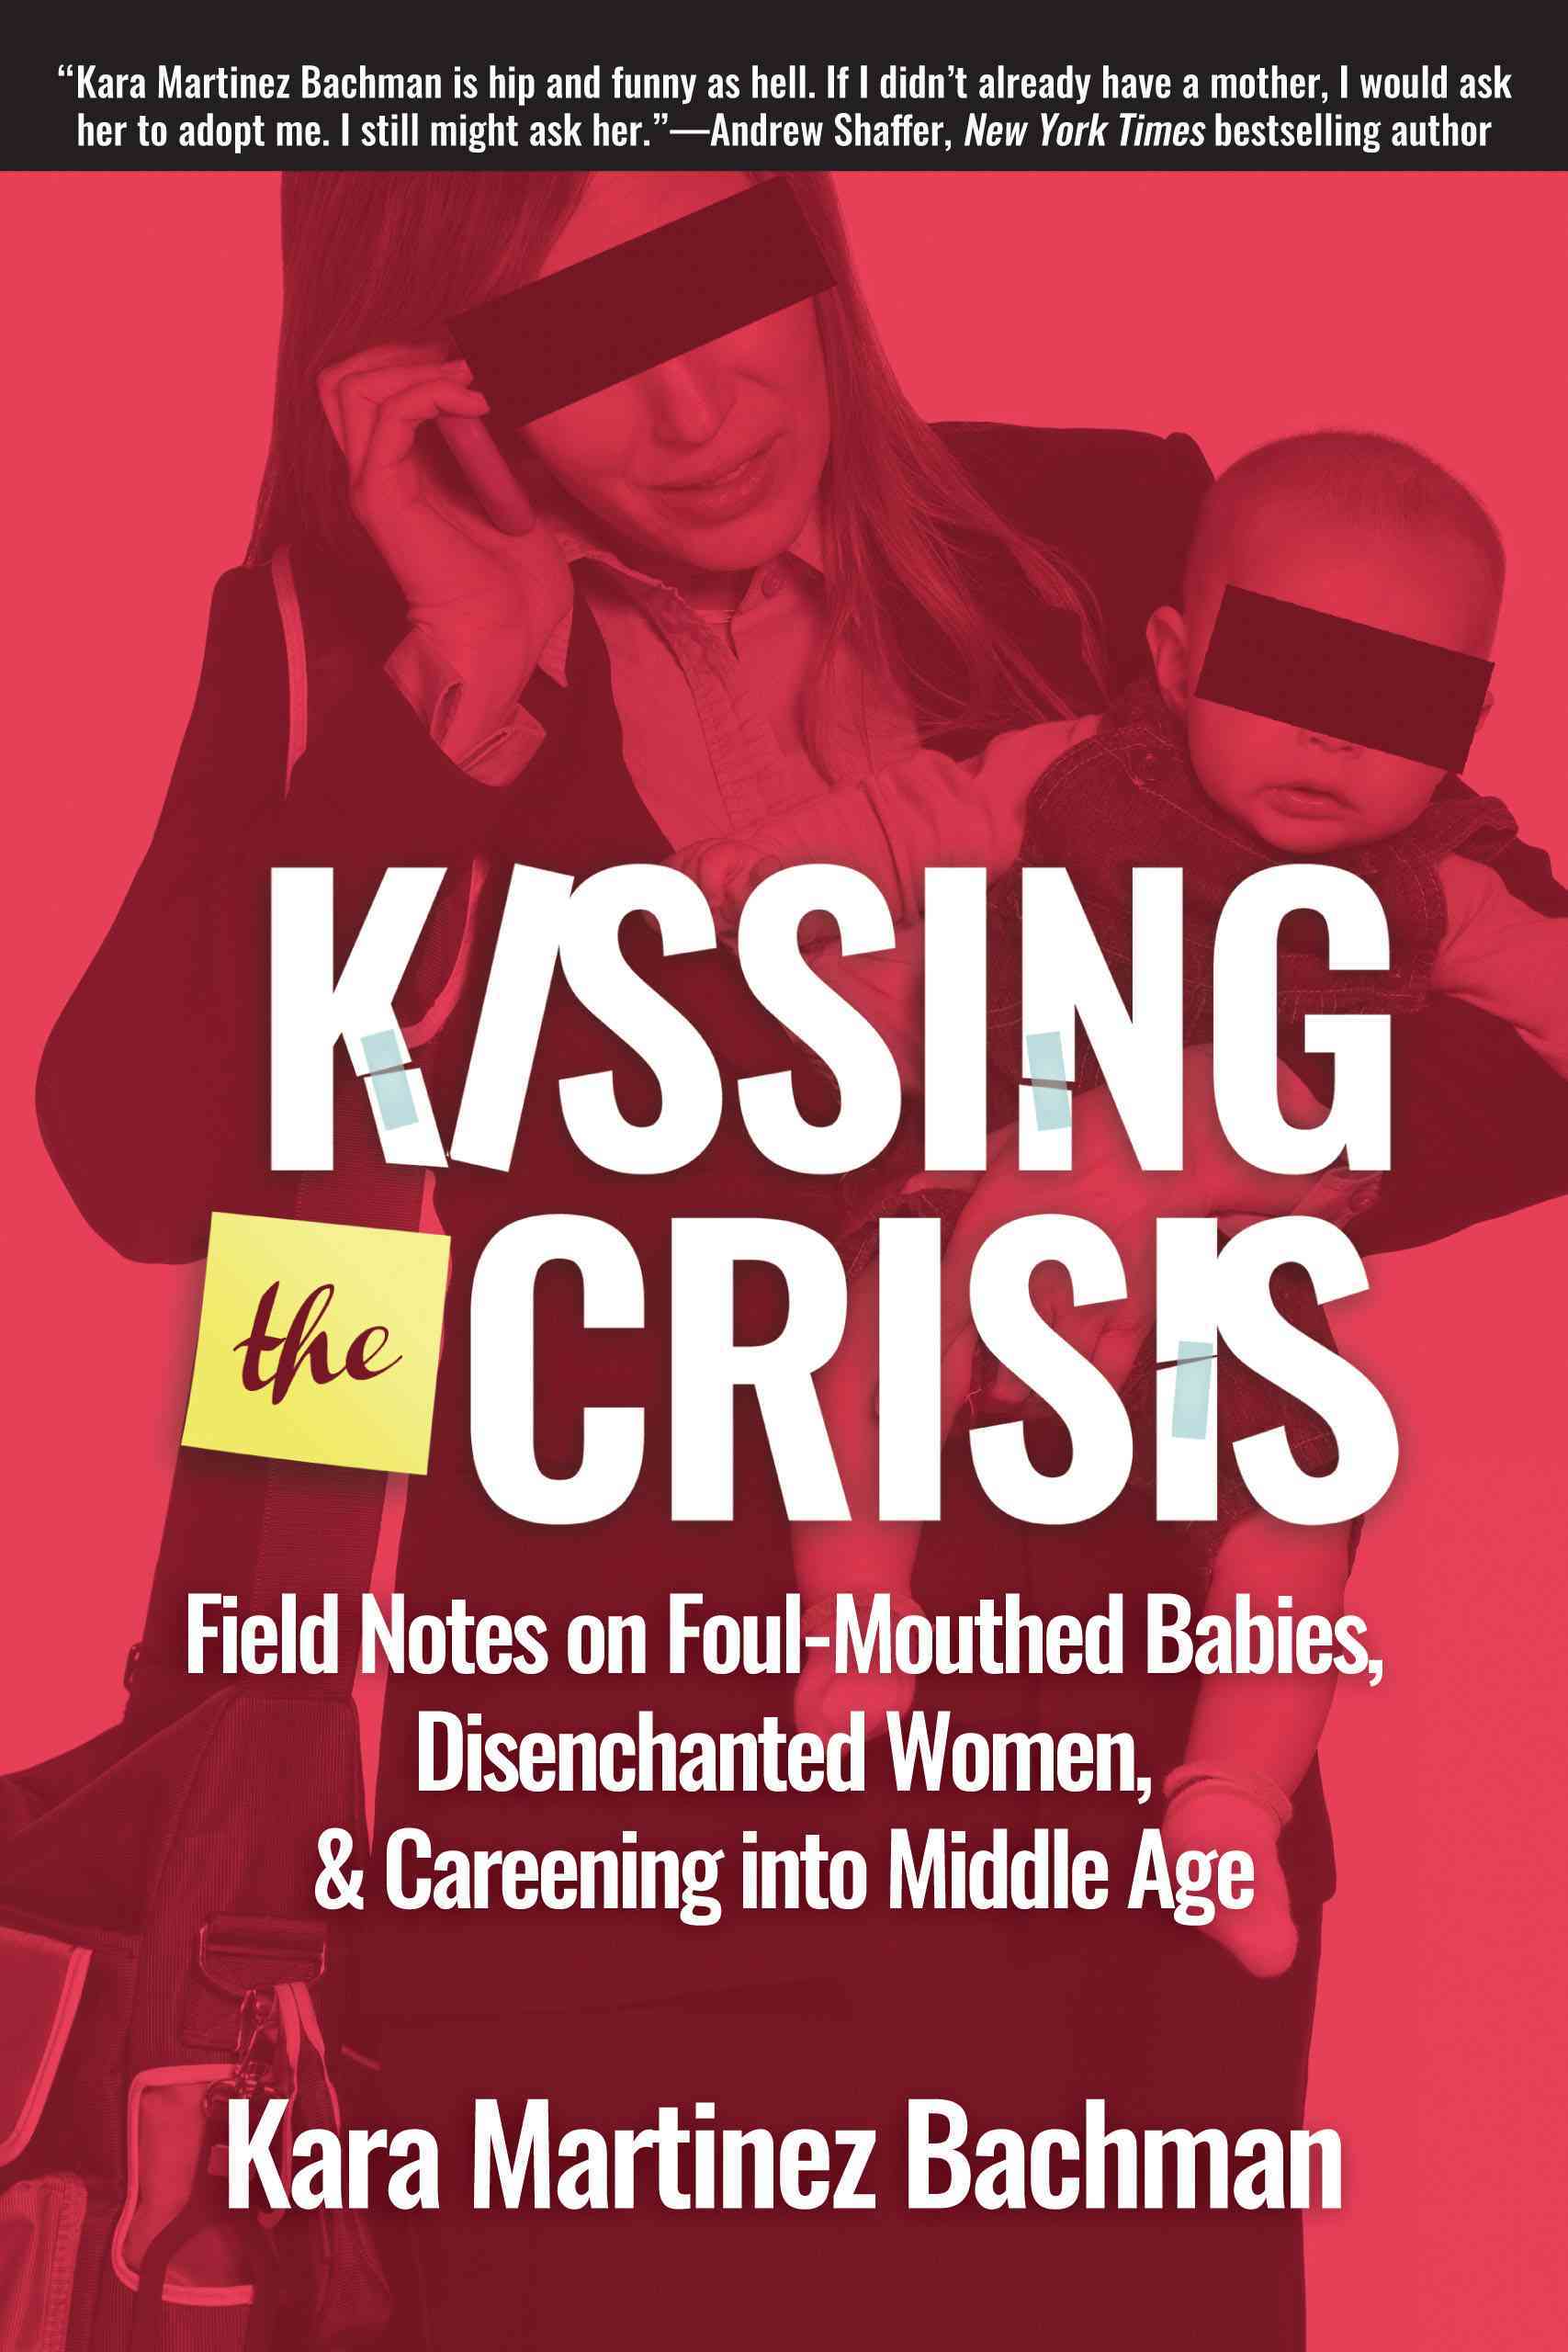 Kissing the Crisis: Field Notes on Foul-Mouthed Babies, Disenchanted Women, and Careening into Middle Age